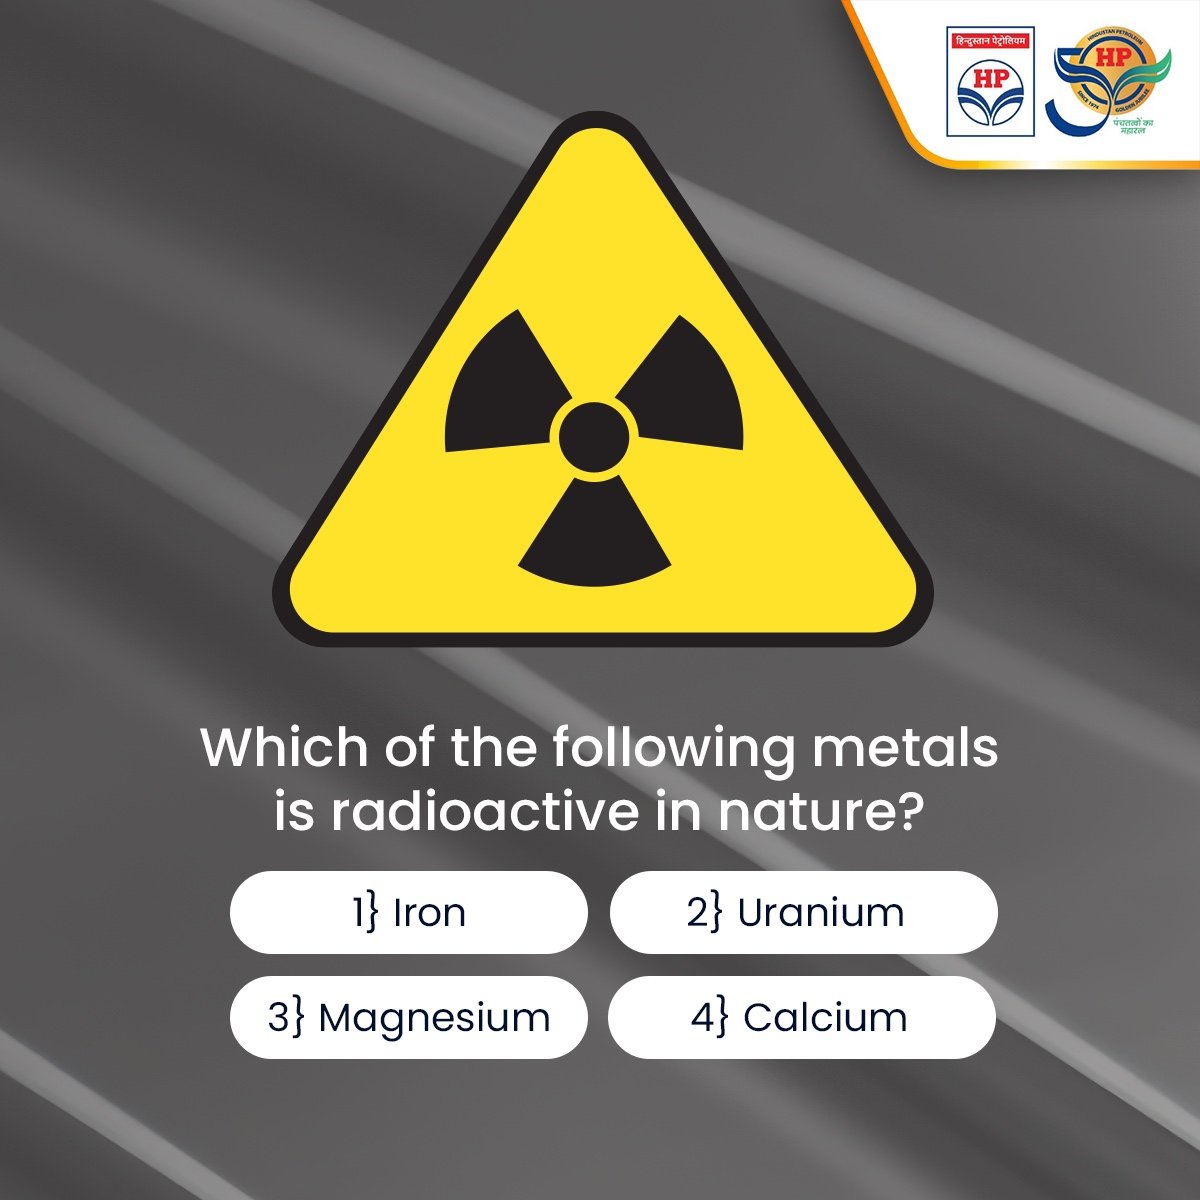 An interesting quiz that will make you revise what you learnt in Science class as a child. Mention the name of the element in the comment section below and also challenge your friends to answer it without checking the internet.

#InterestingQuiz #HPCL #DeliveringHappiness